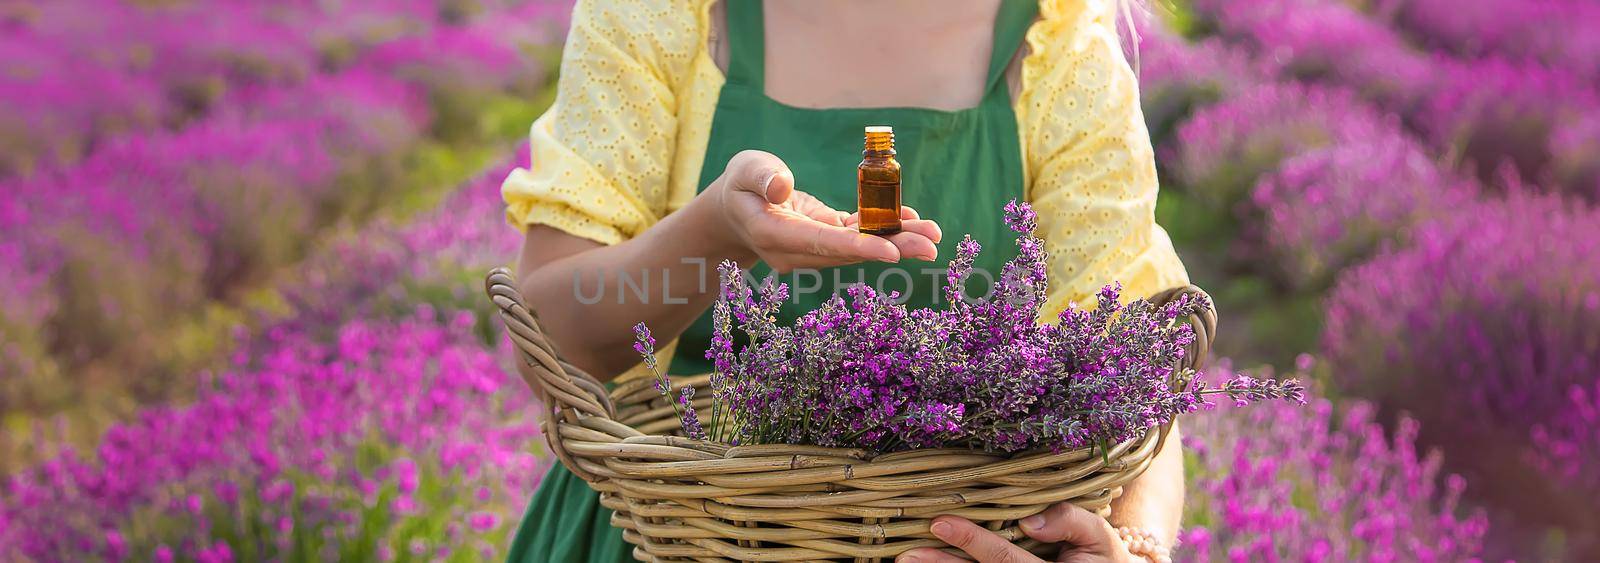 A woman collects lavender flowers for essential oil. Selective focus. by yanadjana